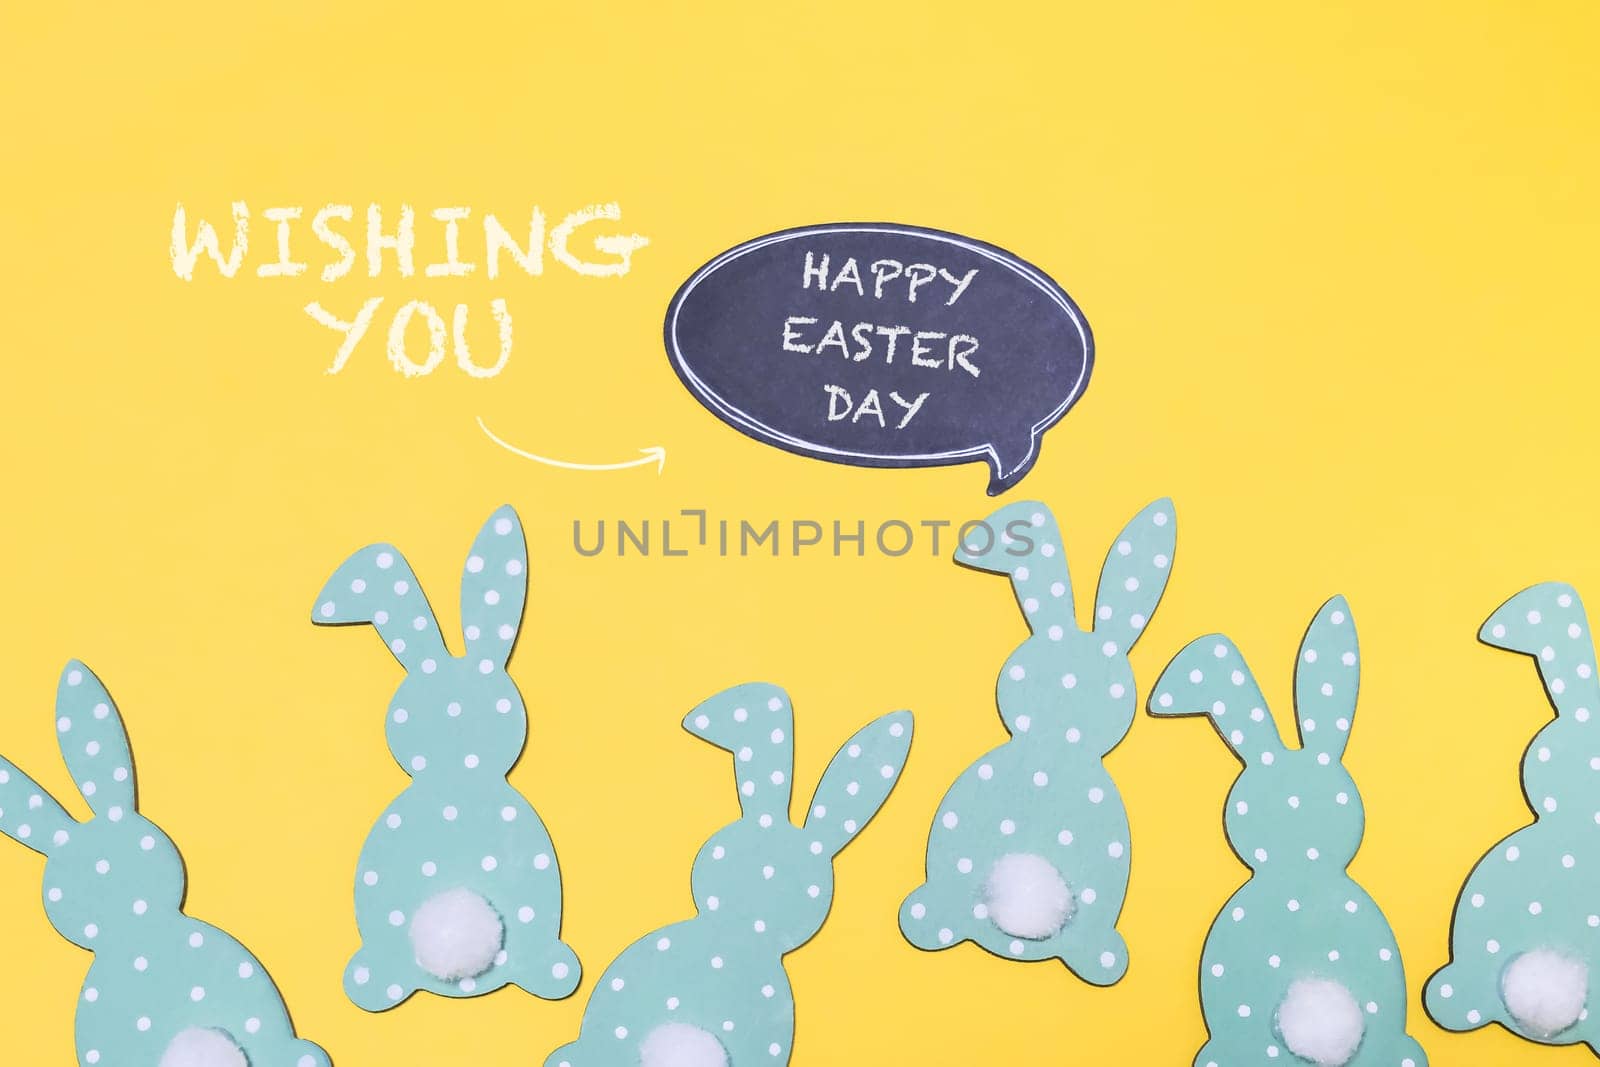 Greeting card or banner for Easter Sunday.  by Alla_Morozova93